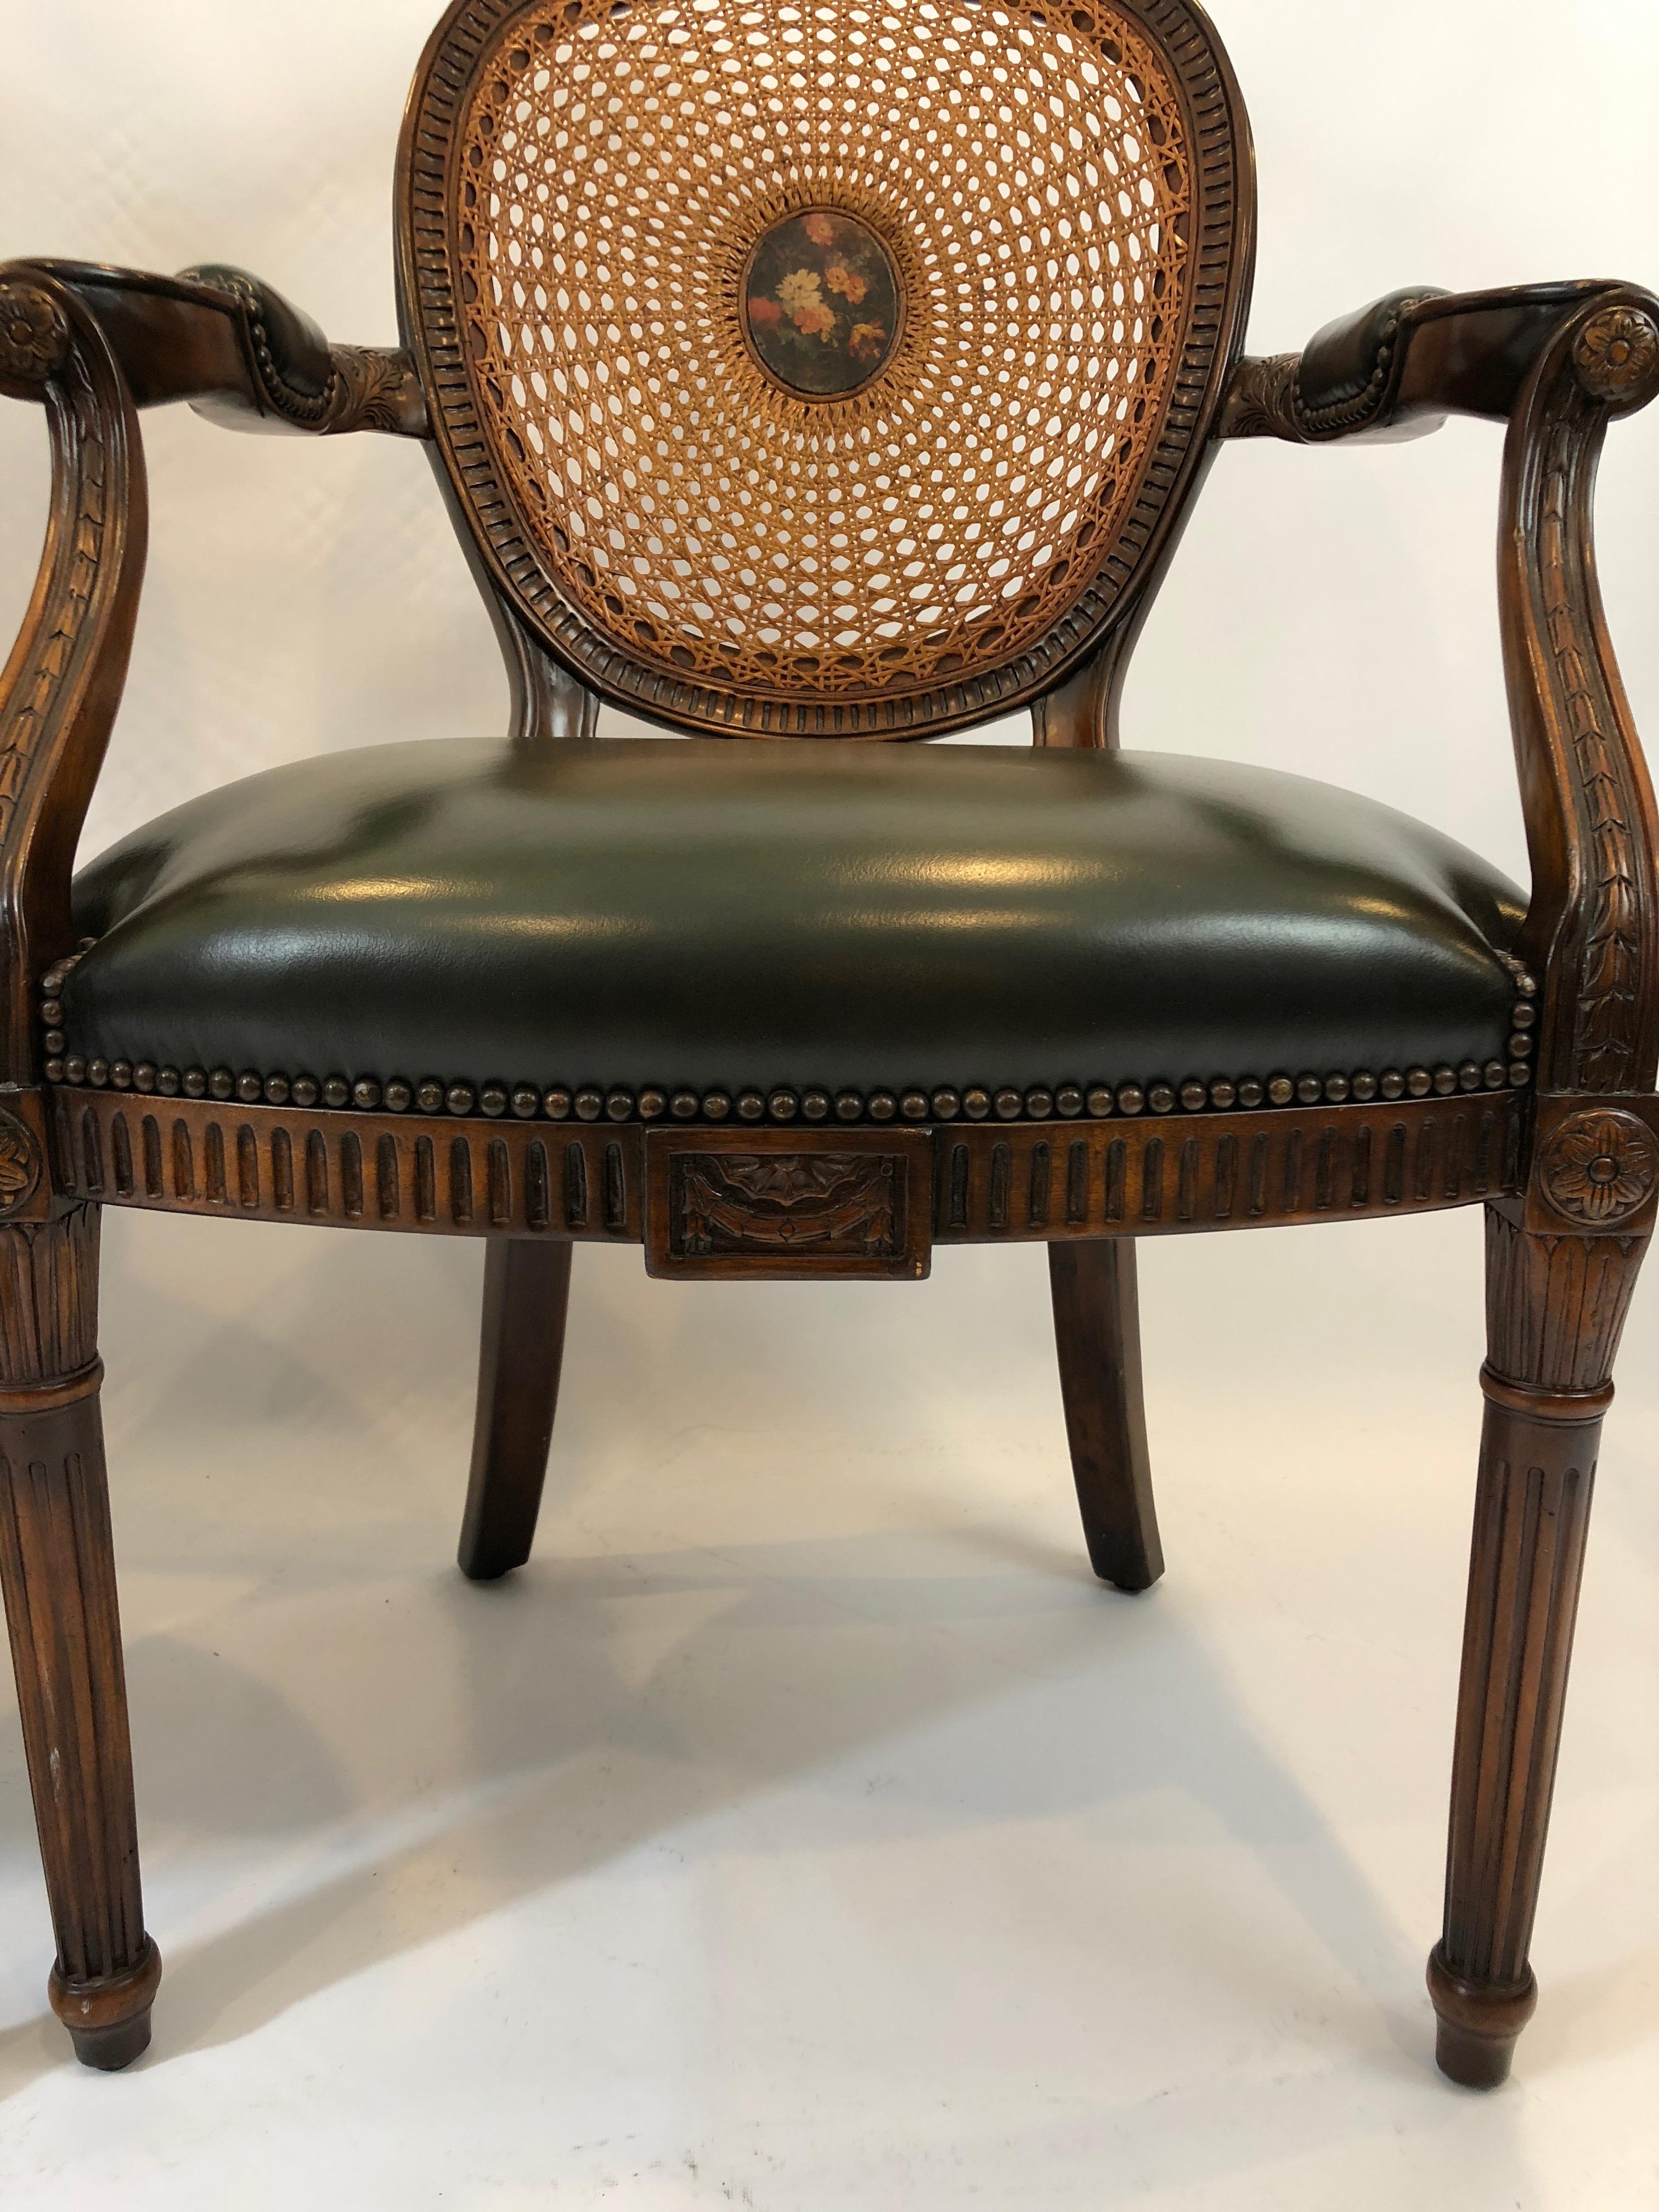 Stunning pair of ornately carved walnut armchairs having caned backs with center oval floral painted medallions and supple green leather seats.
Measures: arm height 28, seat depth 21.